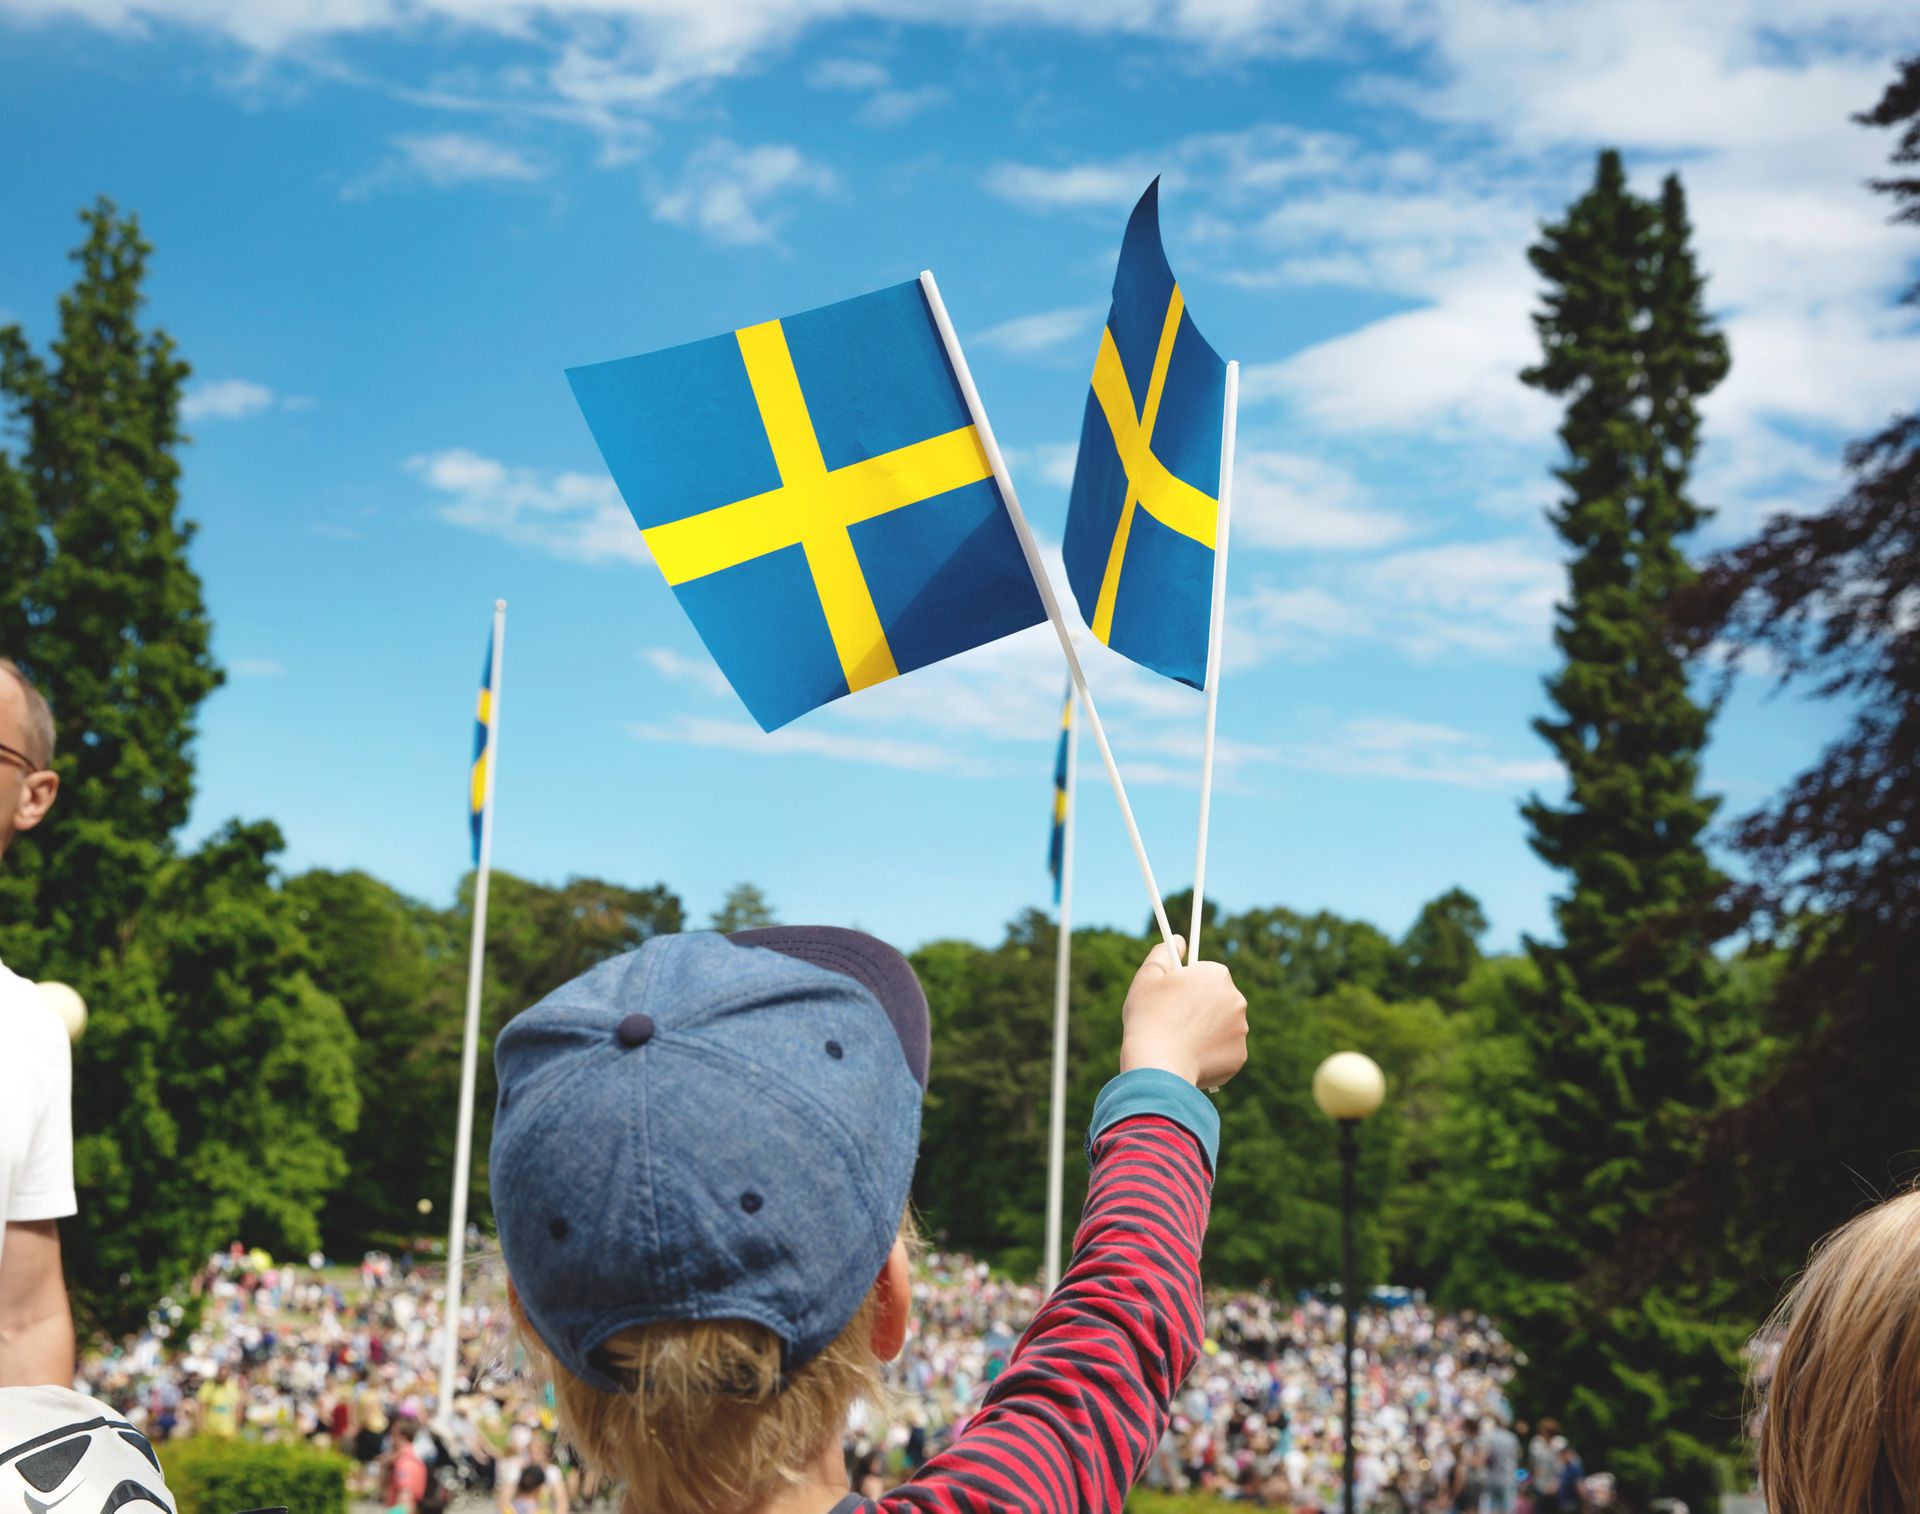 A child in the foreground is waving a Swedish paper flag of blue and yellow. In the background there is a crowd of people in a field surrounded by trees.